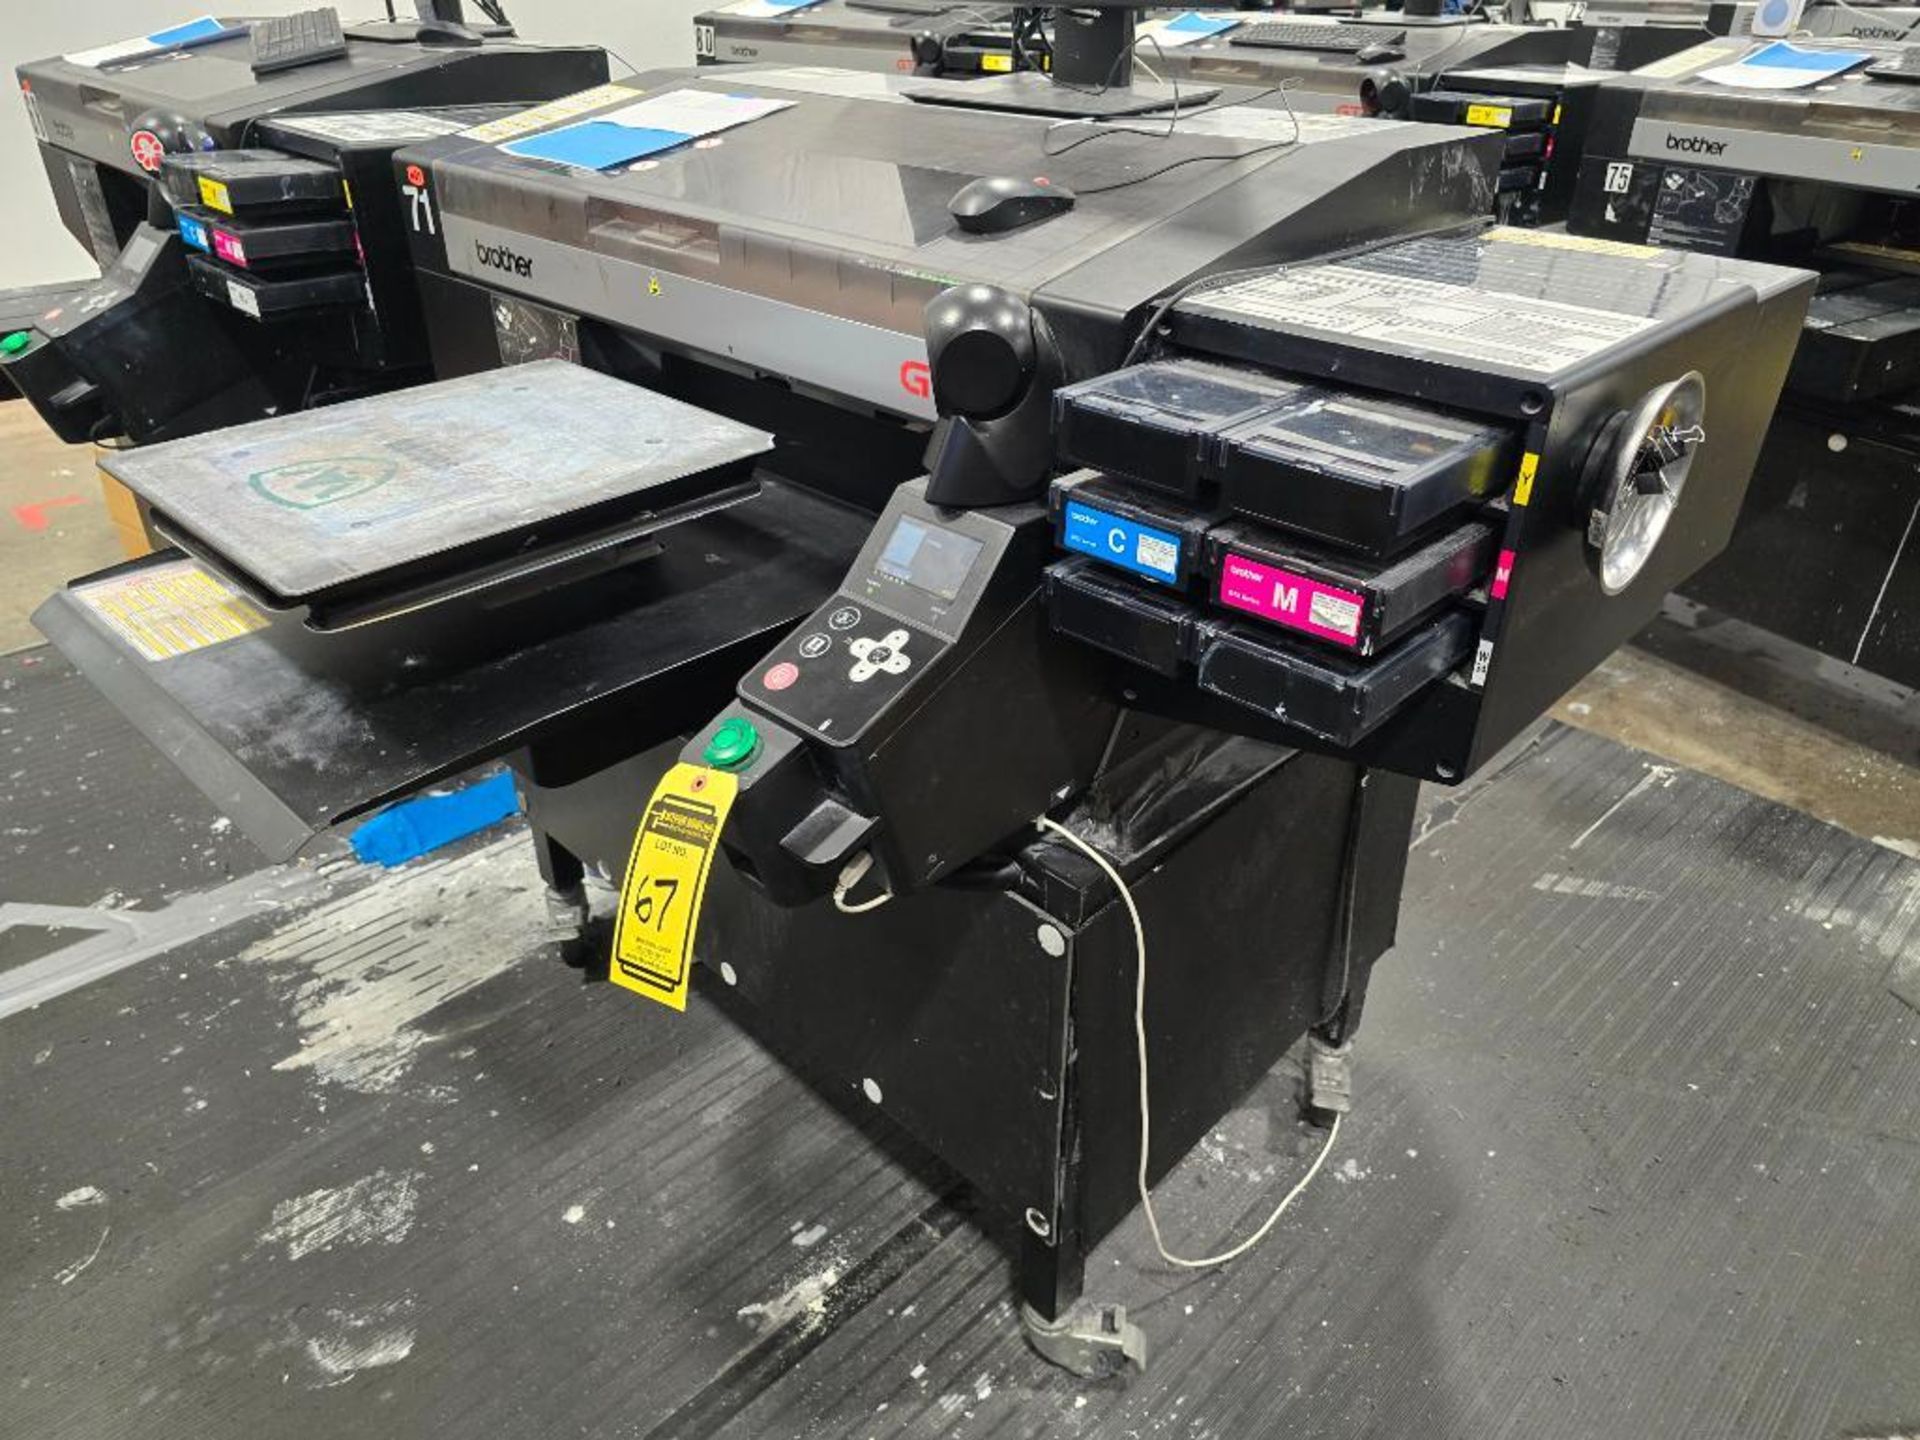 2018 Brother GTX-422 DTG (Direct to Garment) Printer, Twin Head, 6-Color, Water Based Pigmented Ink, - Image 2 of 10